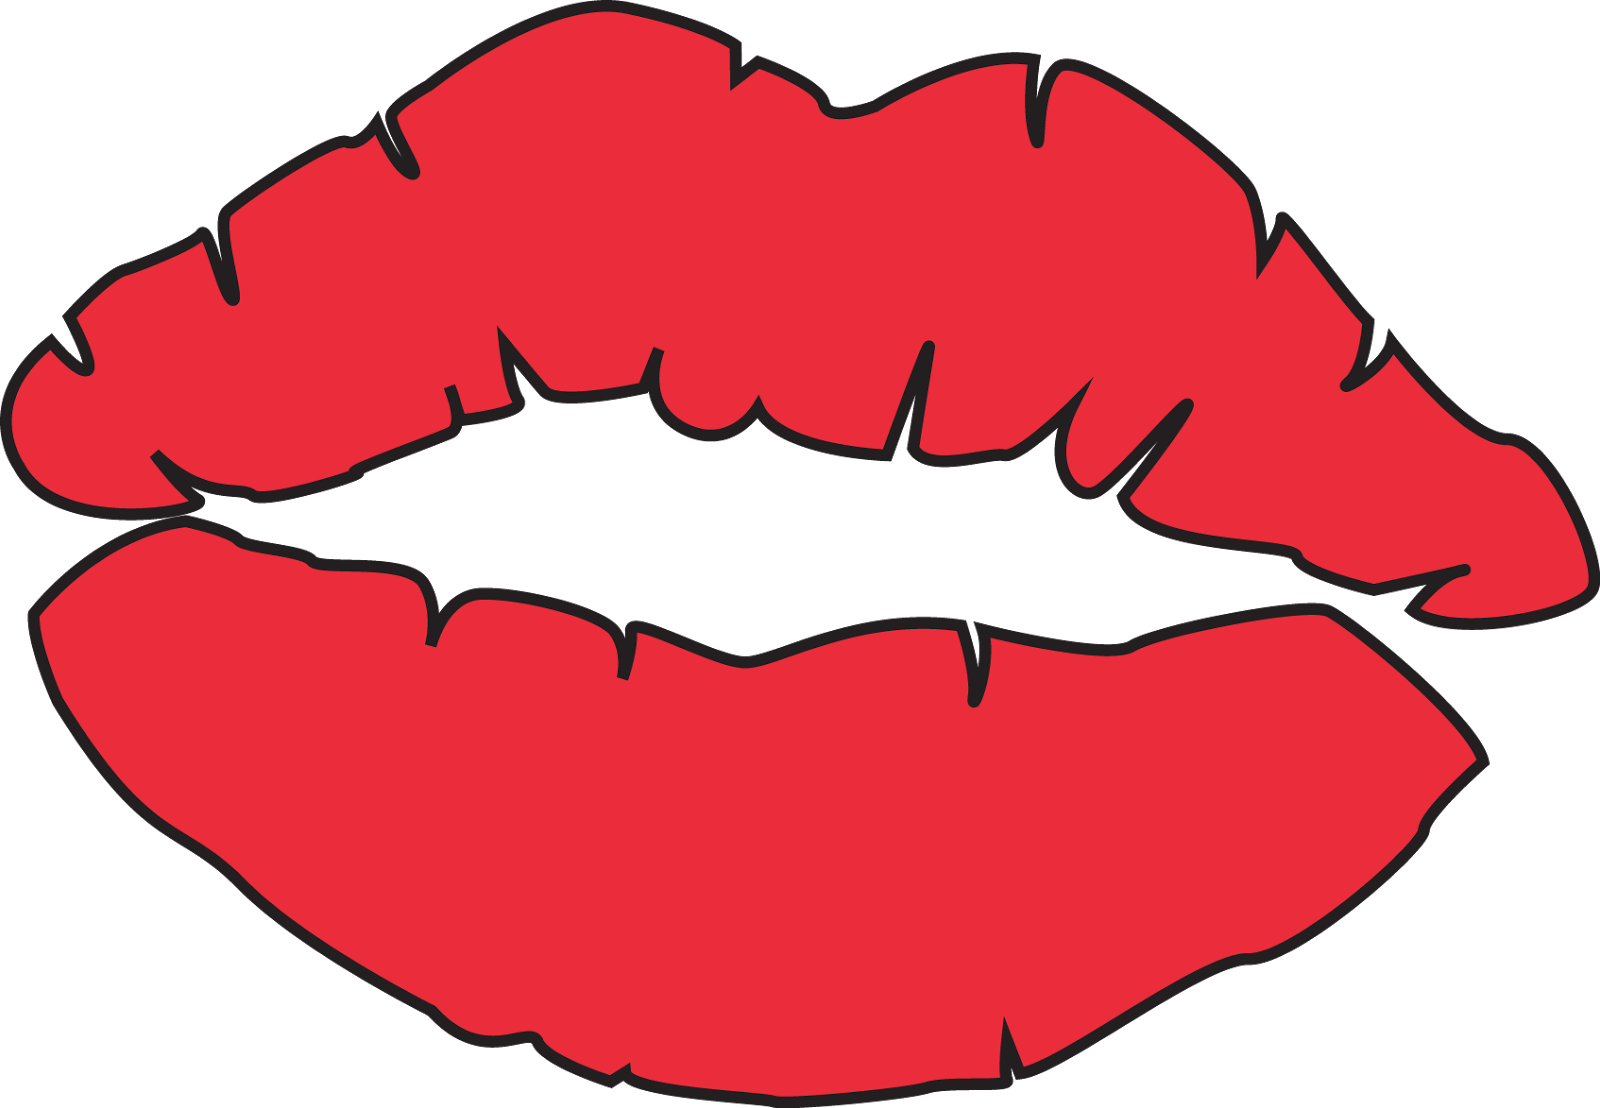 25 Lips Coloring Pages Free Cliparts That You Can Download To You